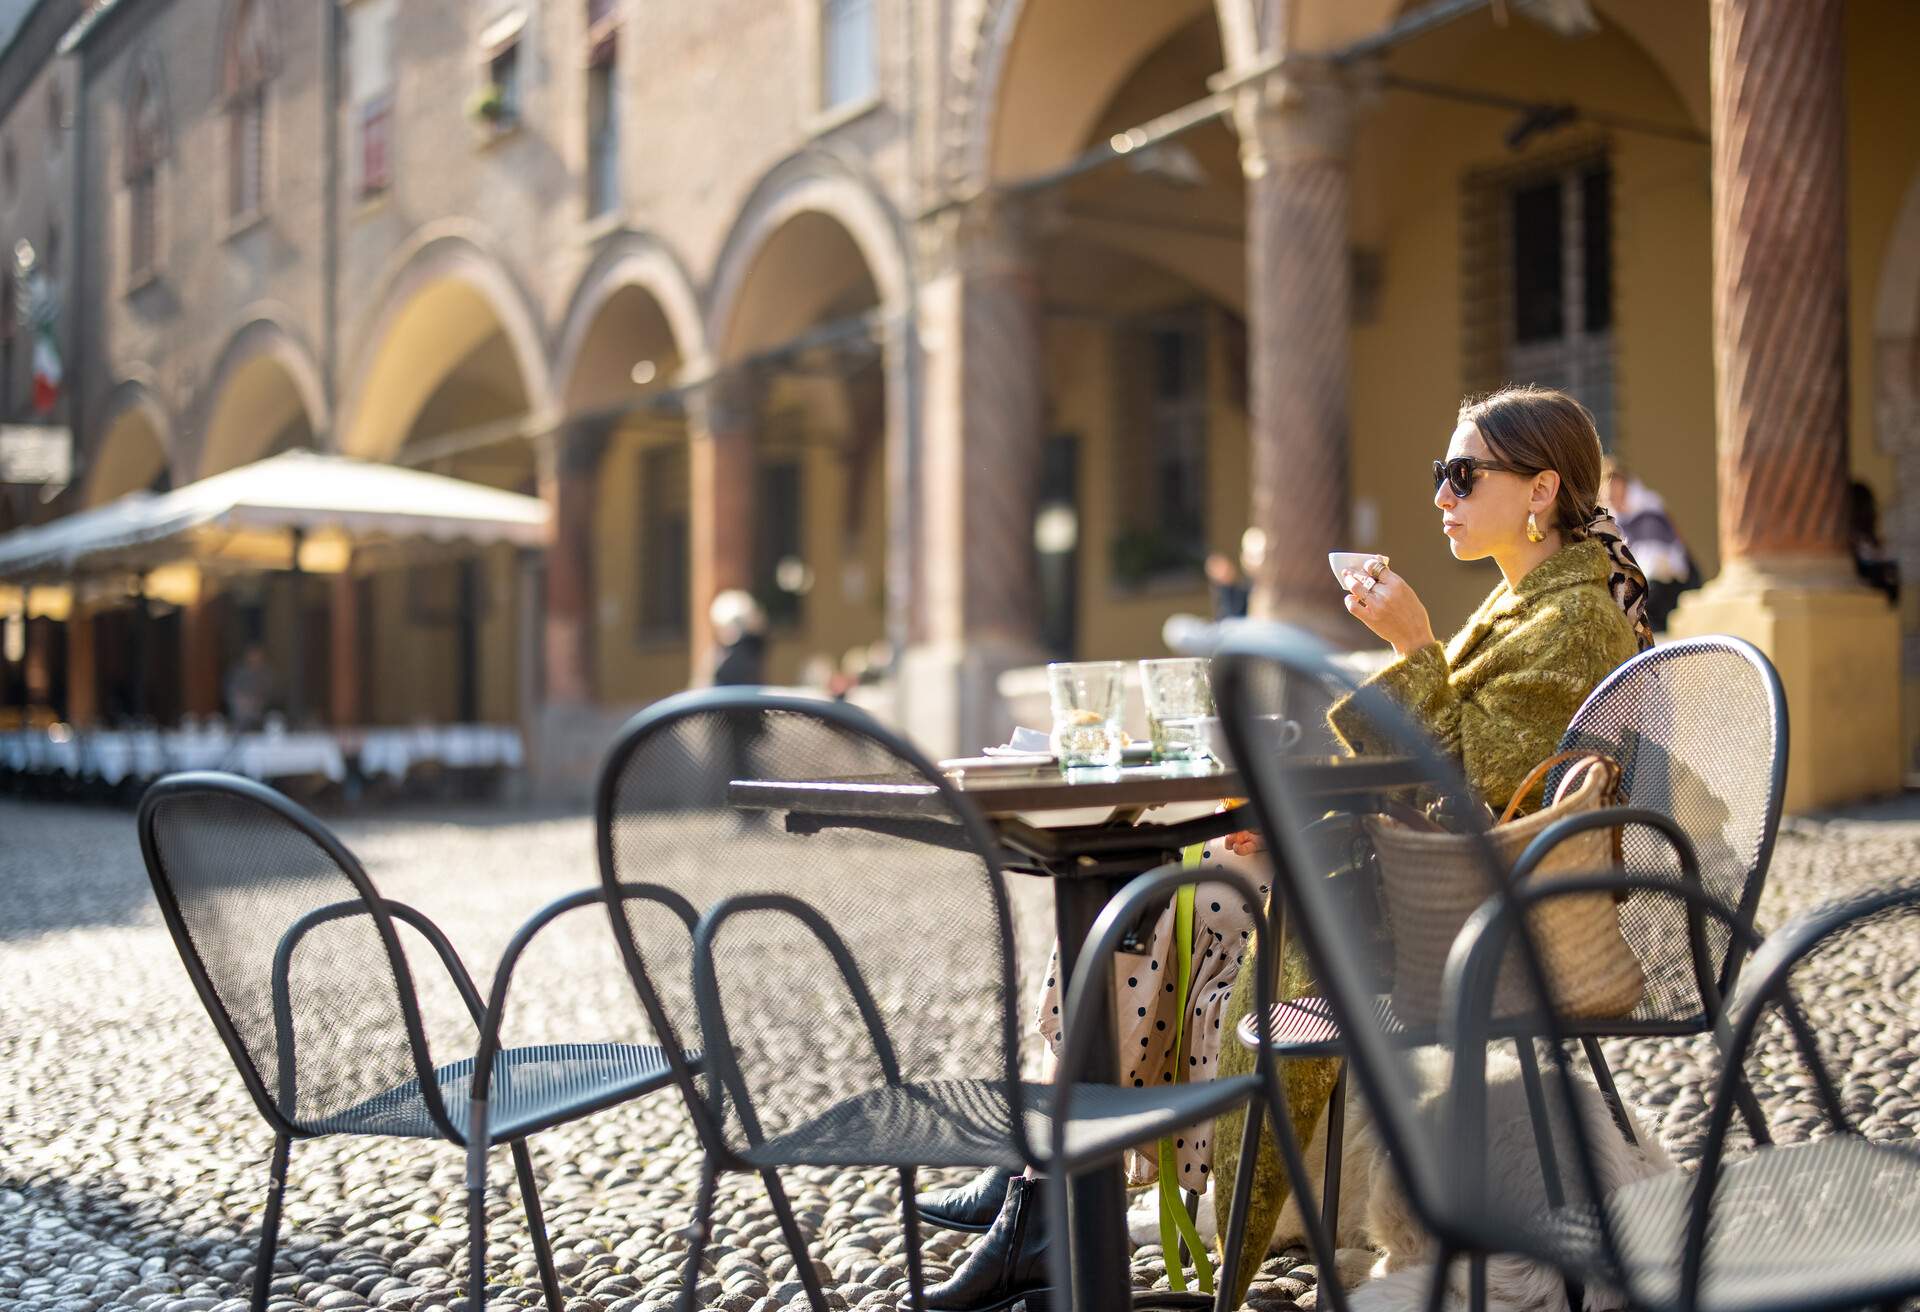 ITALY_BOLOGNA_CAFE_PEOPLE_WOMAN_COFFEE